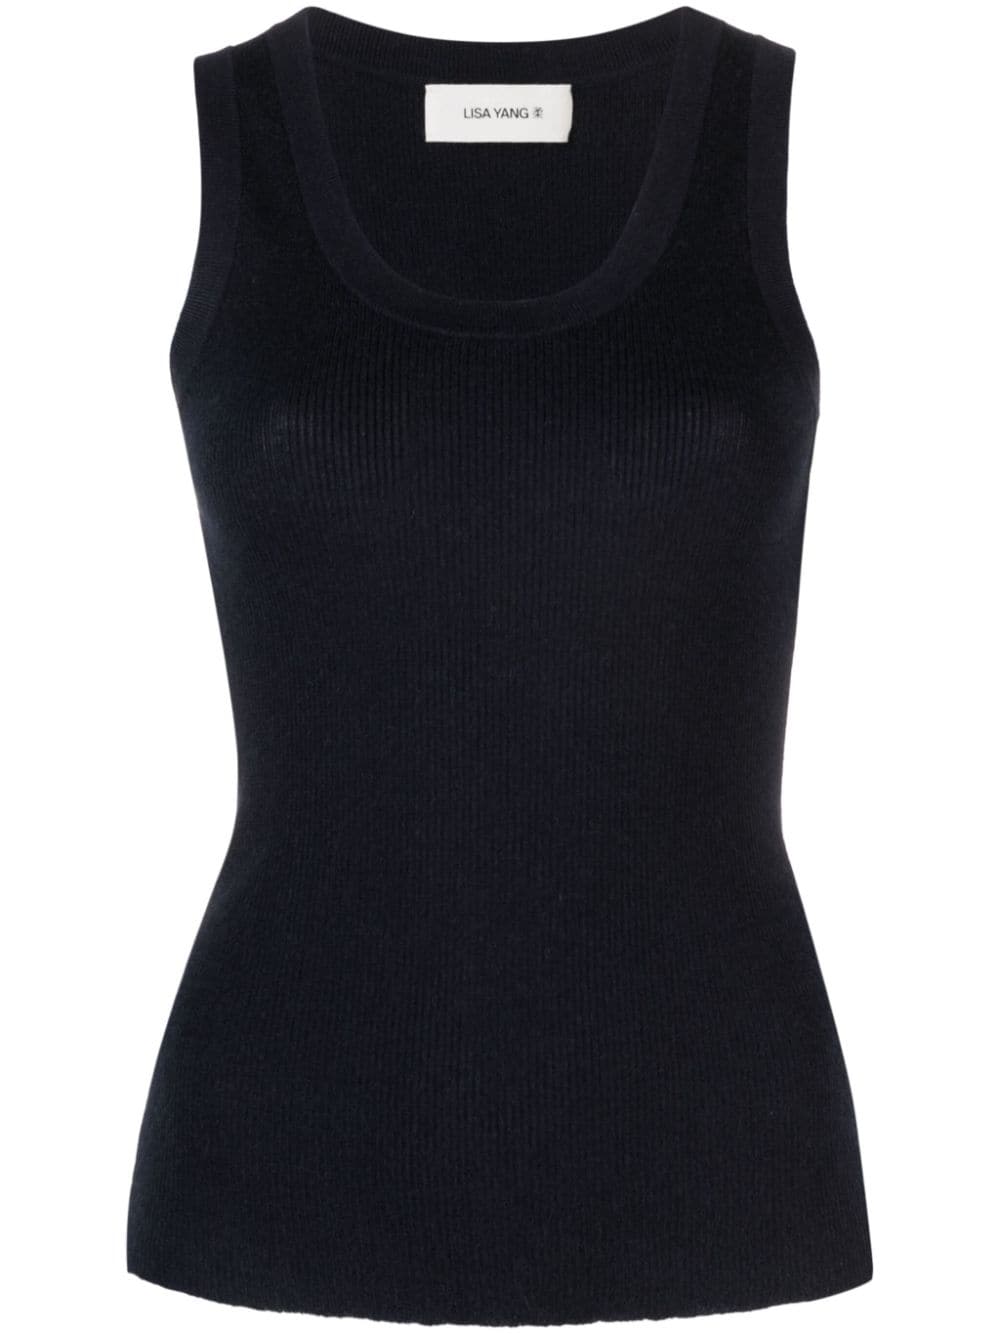 Cashmere Ina Tank Top